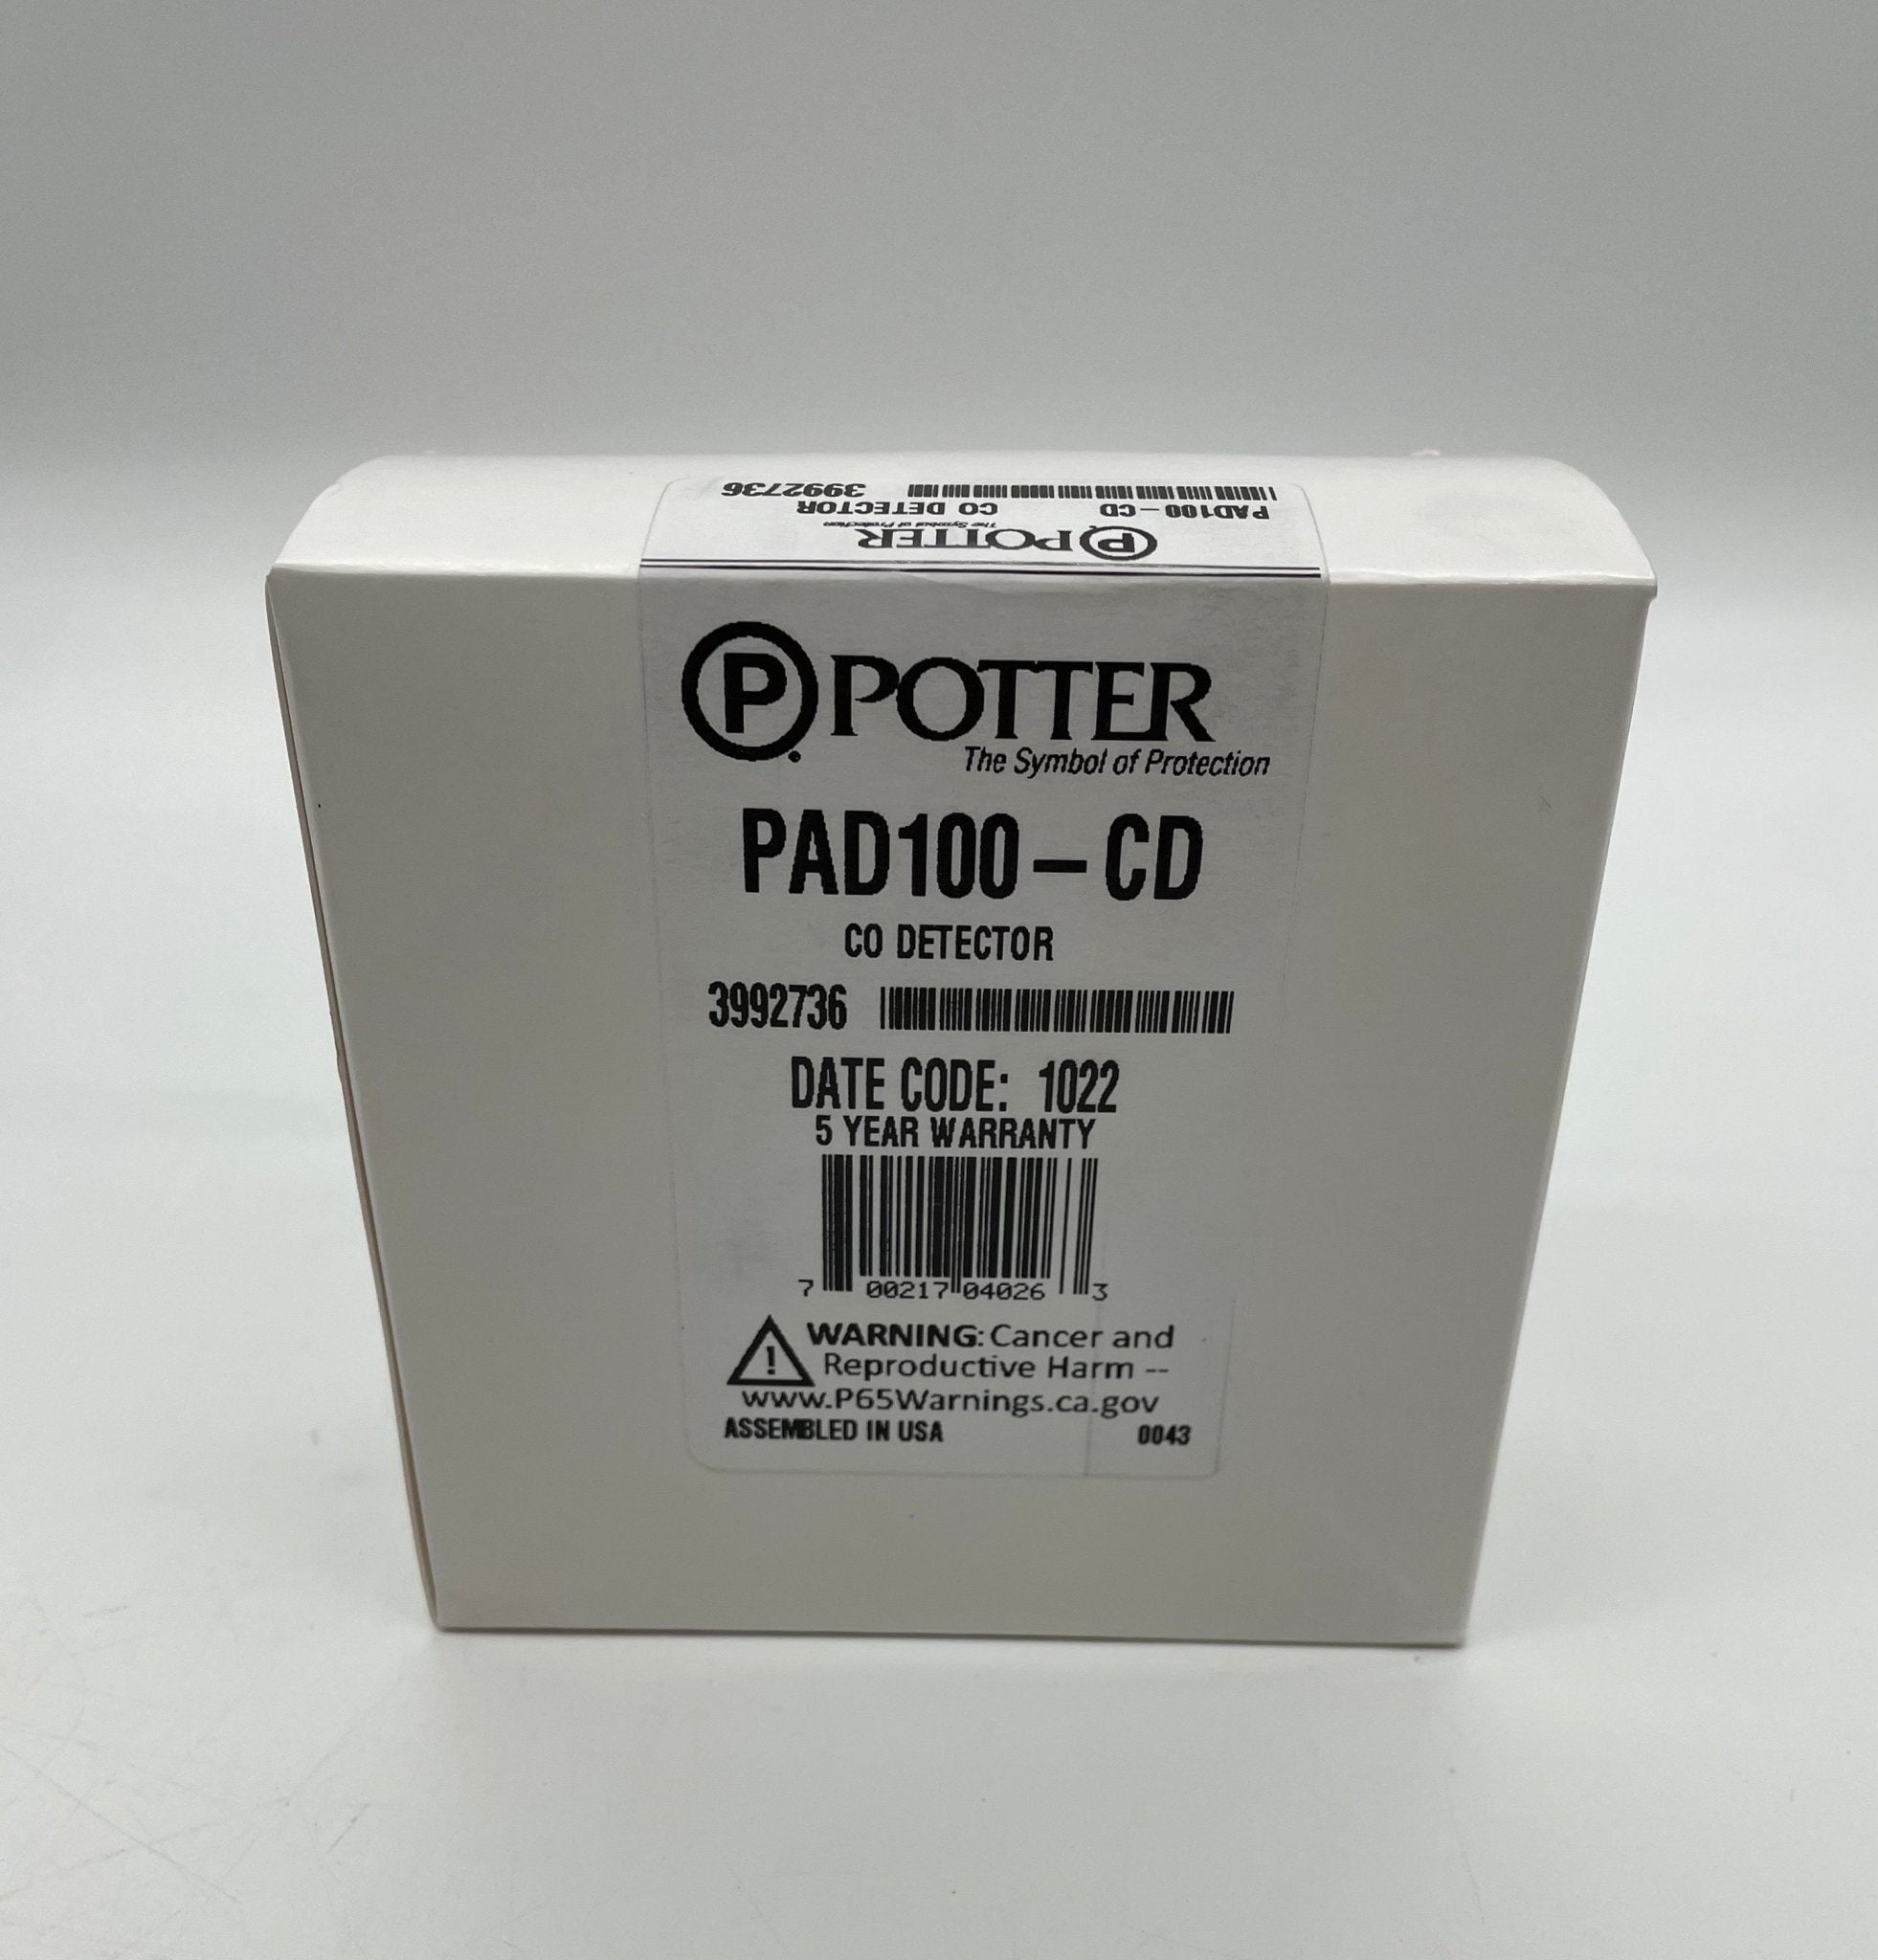 Potter PAD100-CD - The Fire Alarm Supplier